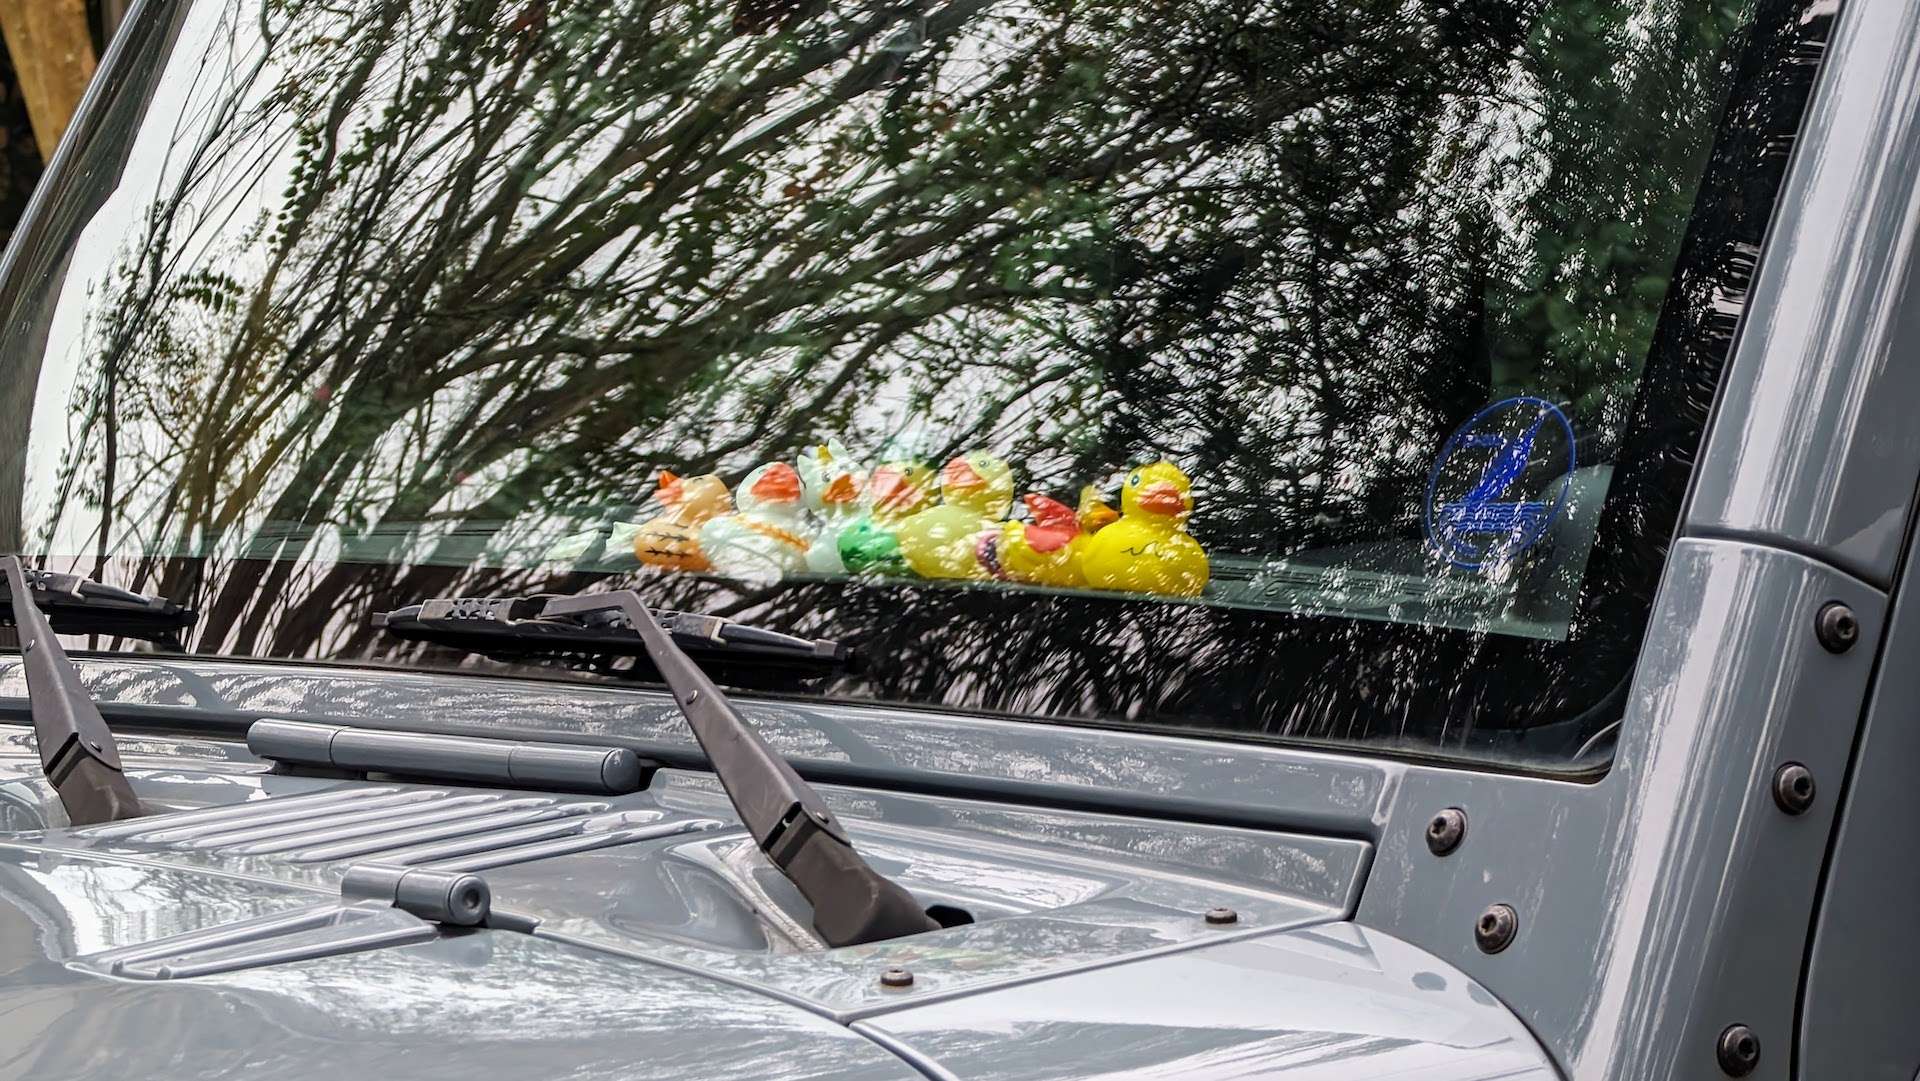 rubber ducks on the dash of a jeep